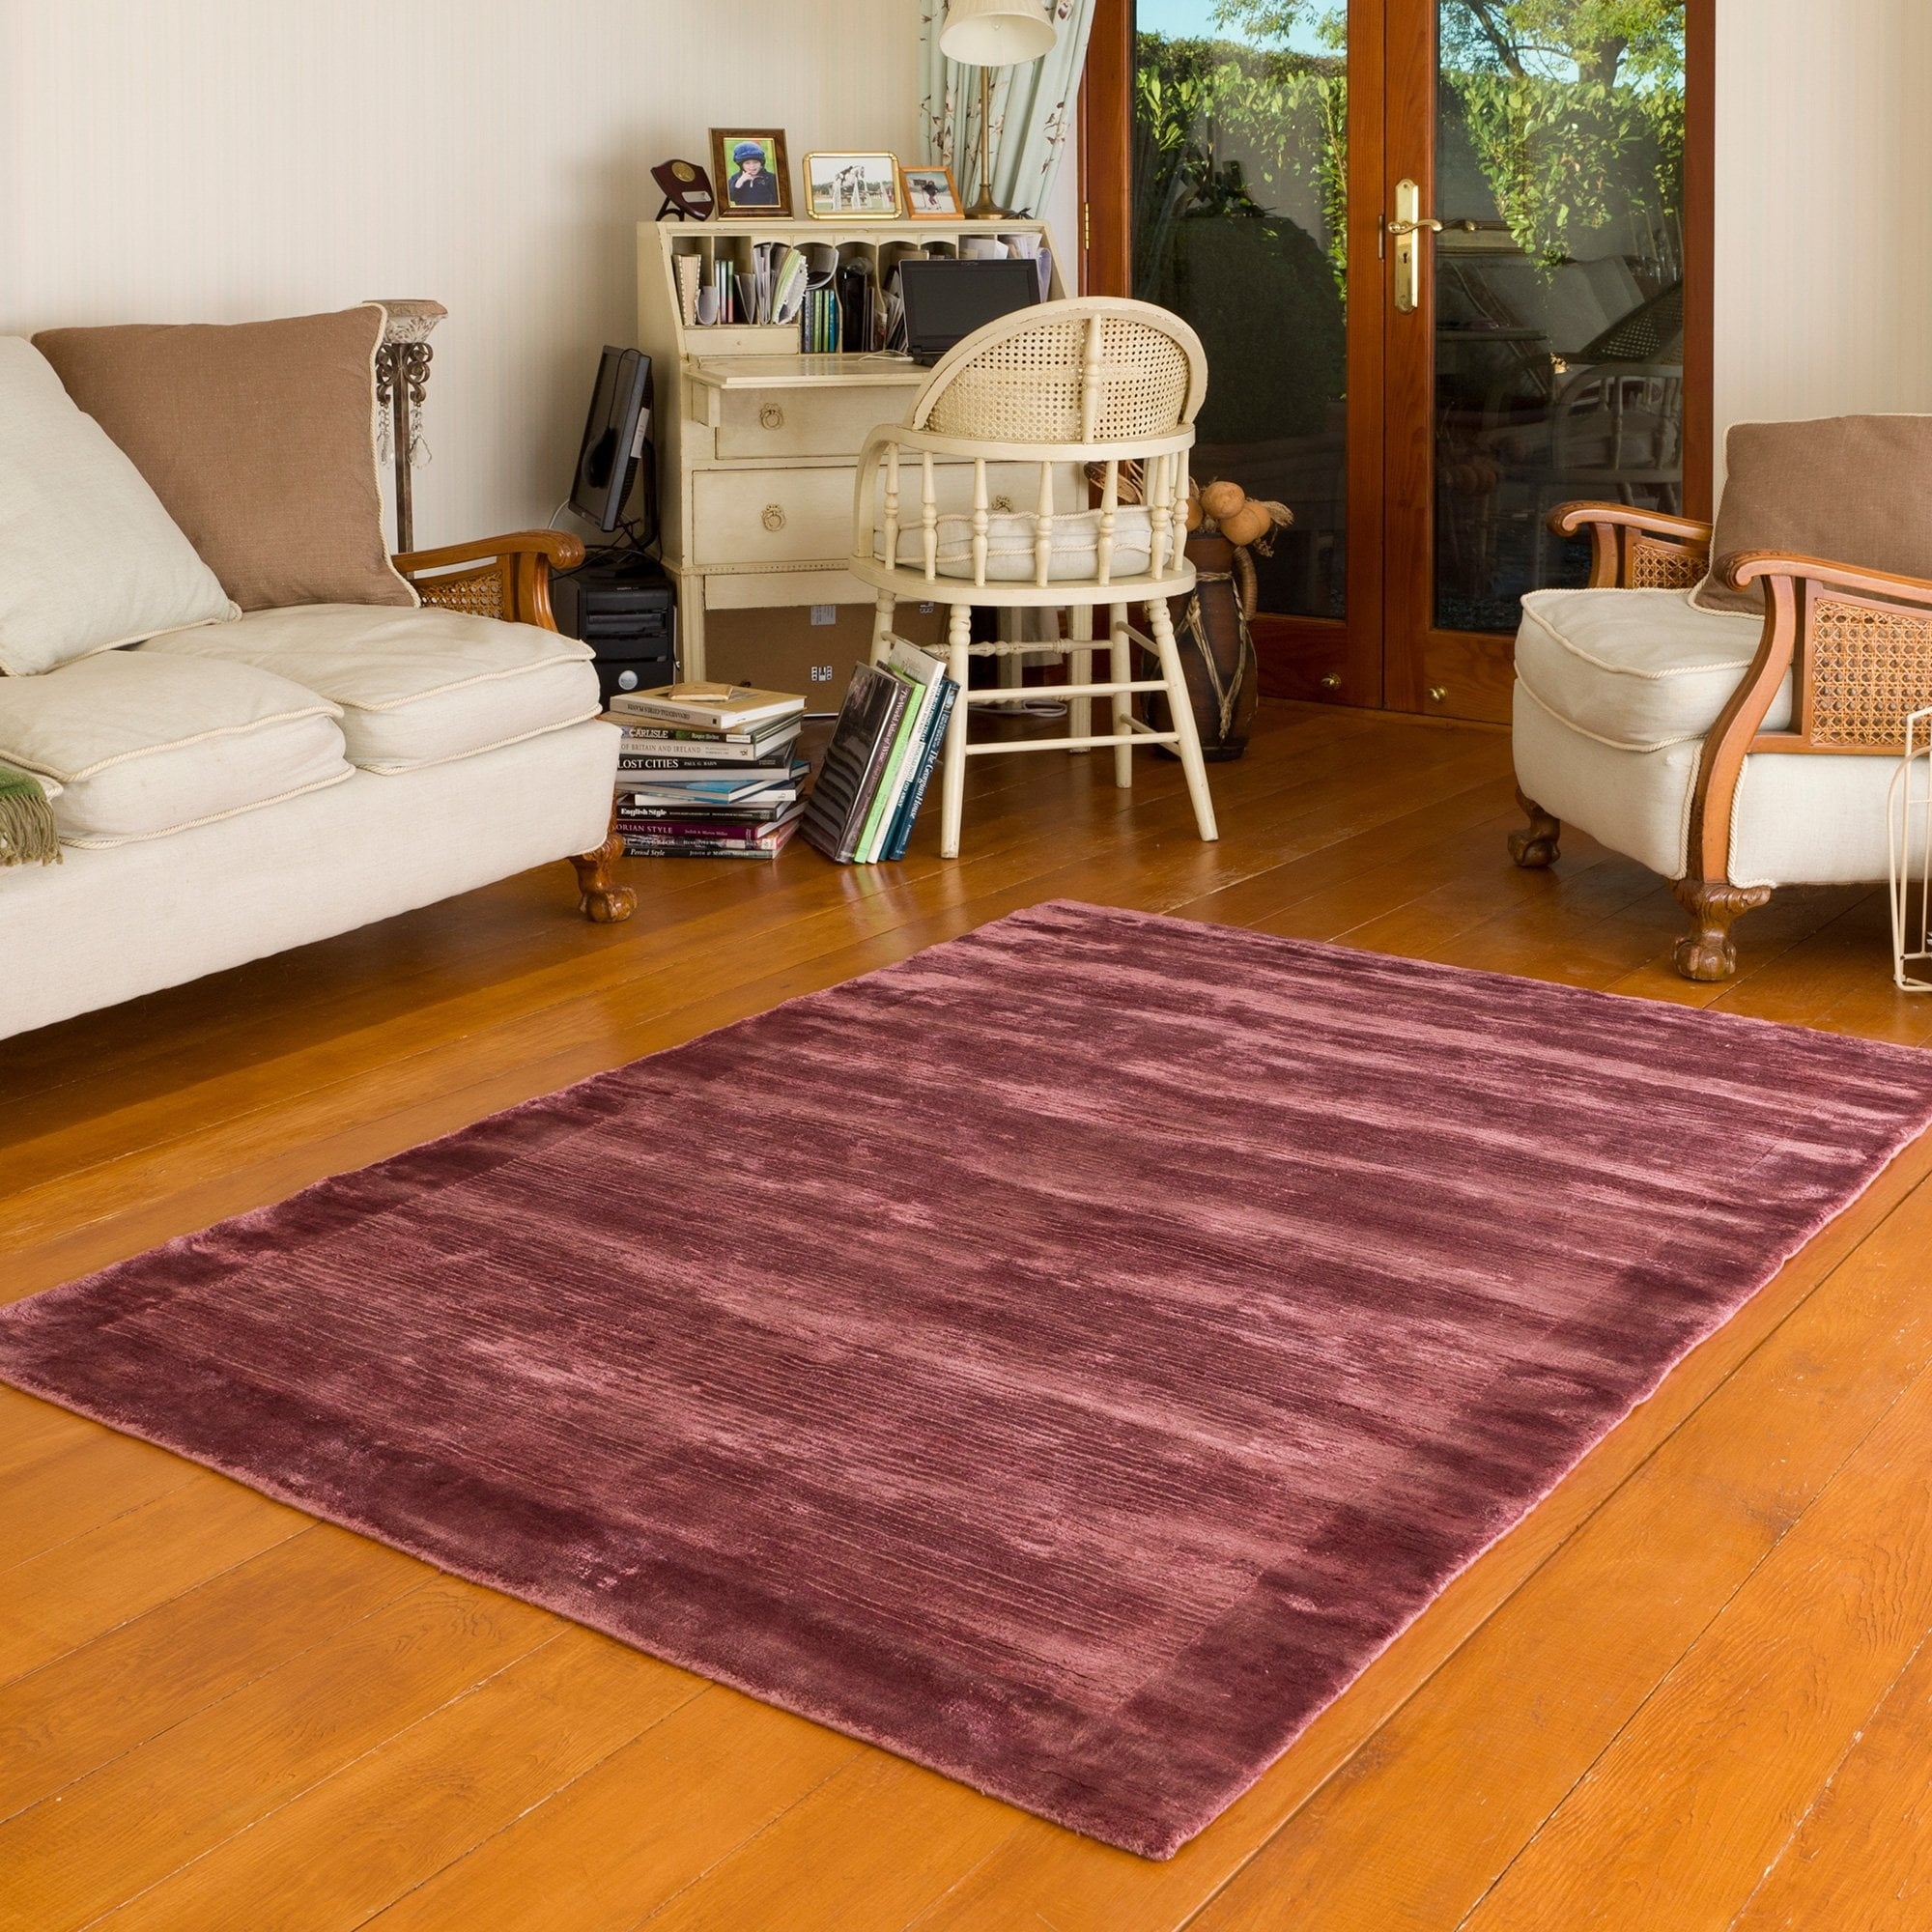 The Real Rug Company – Salar Bamboo Rug D6 Red/Purple 130 x 190cm / Red / Purple – The Rug Quarter